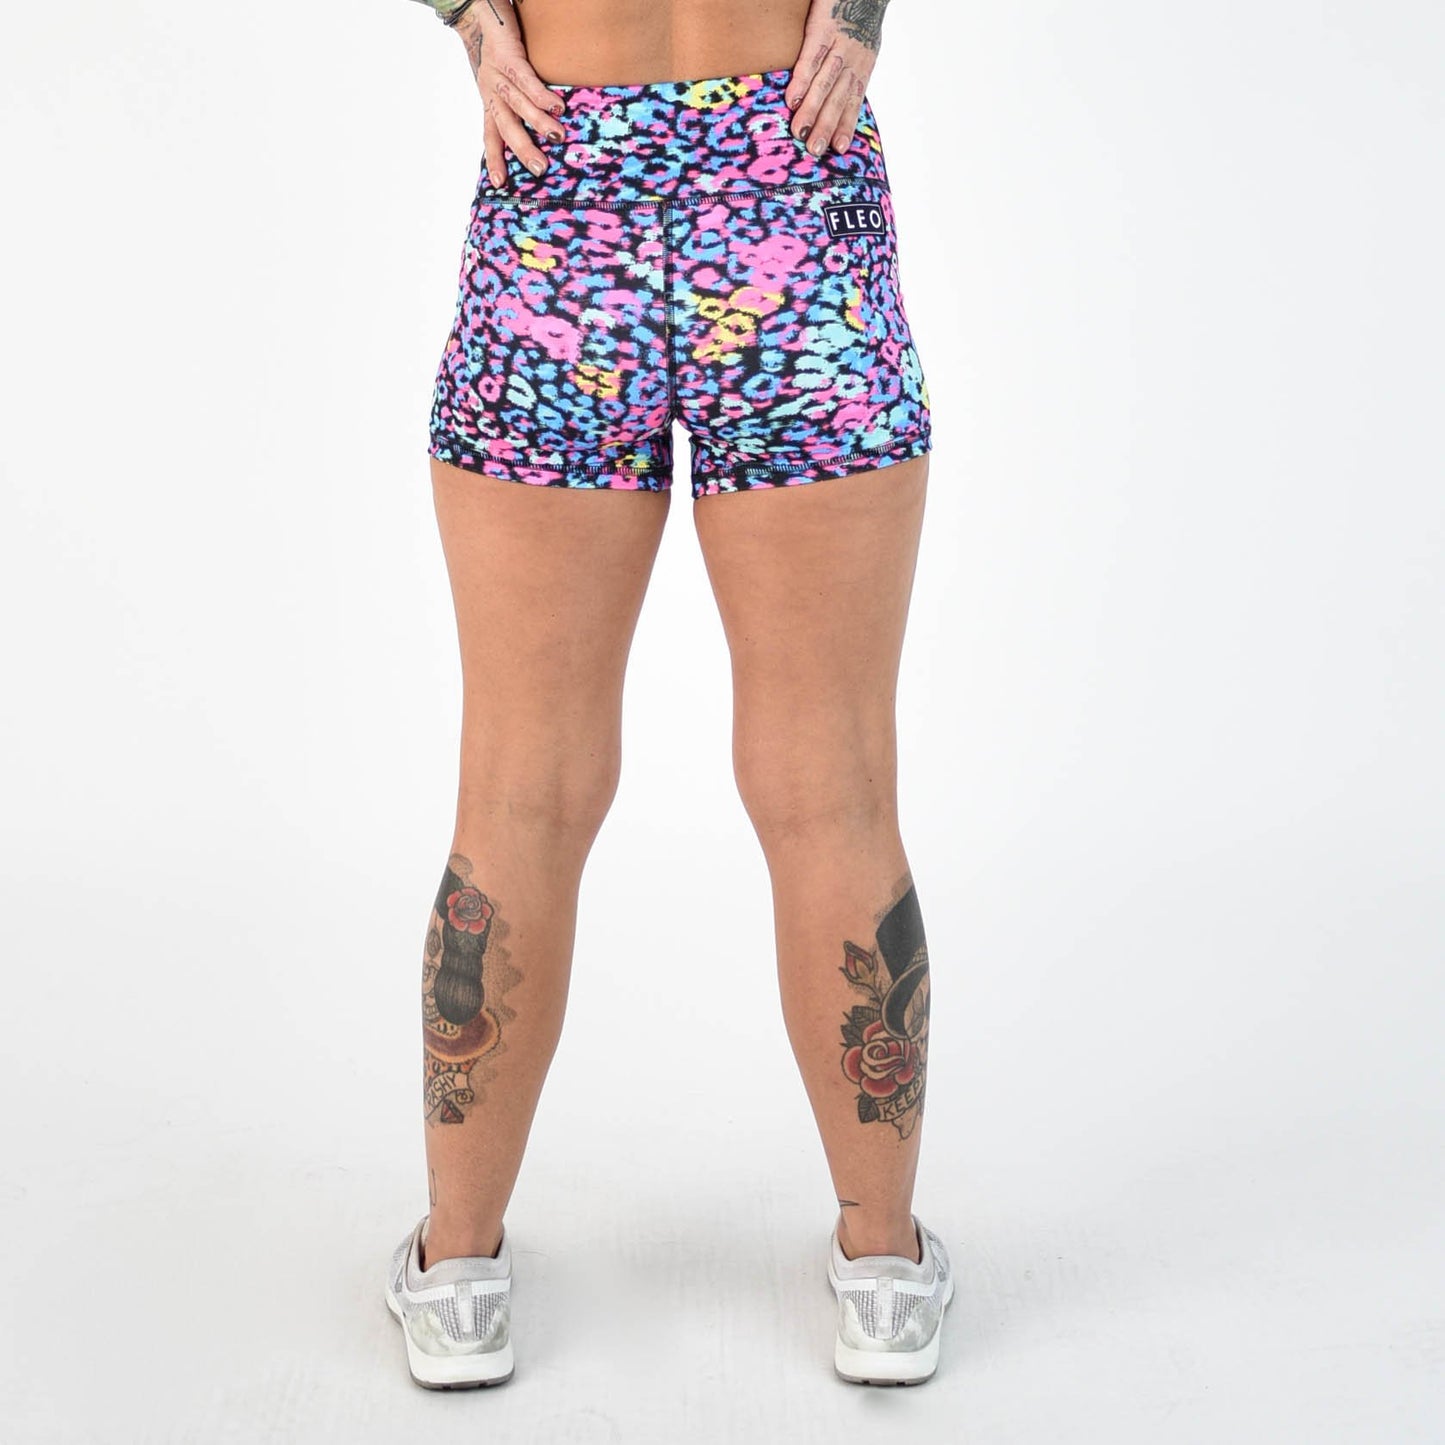 FLEO Miami Leopard Shorts (Power High-rise) - 9 for 9